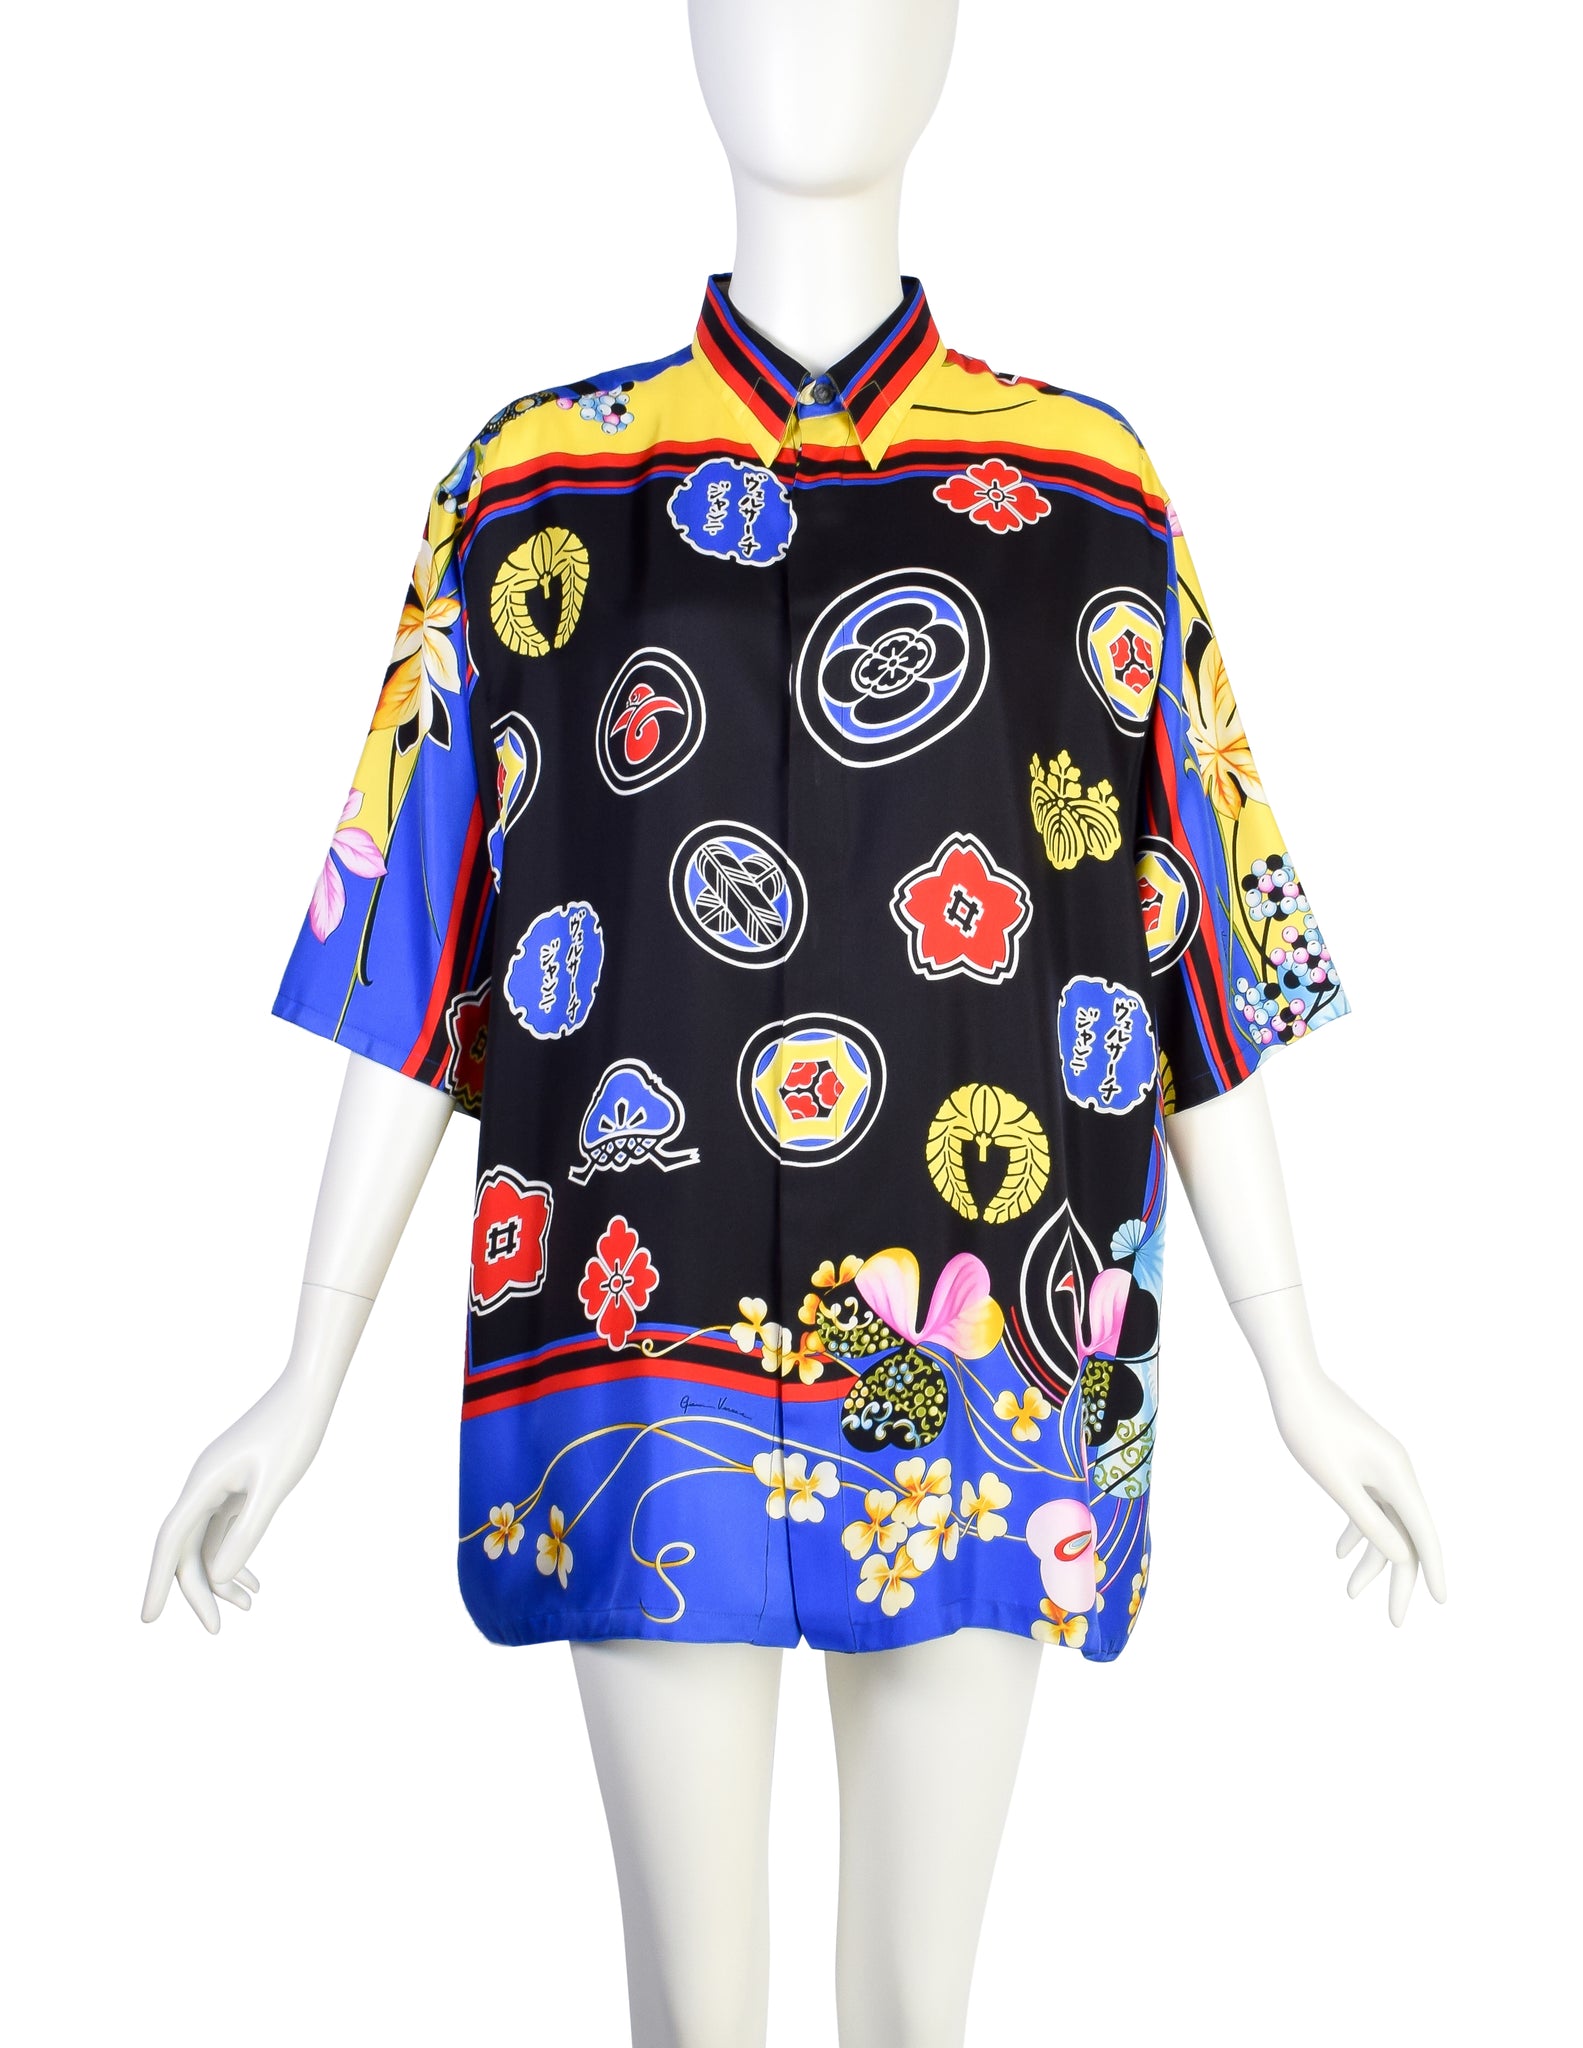 Gianni Versace Vintage SS 1998 Men's Japanese Inspired Tropical Print Silk Button Up Shirt